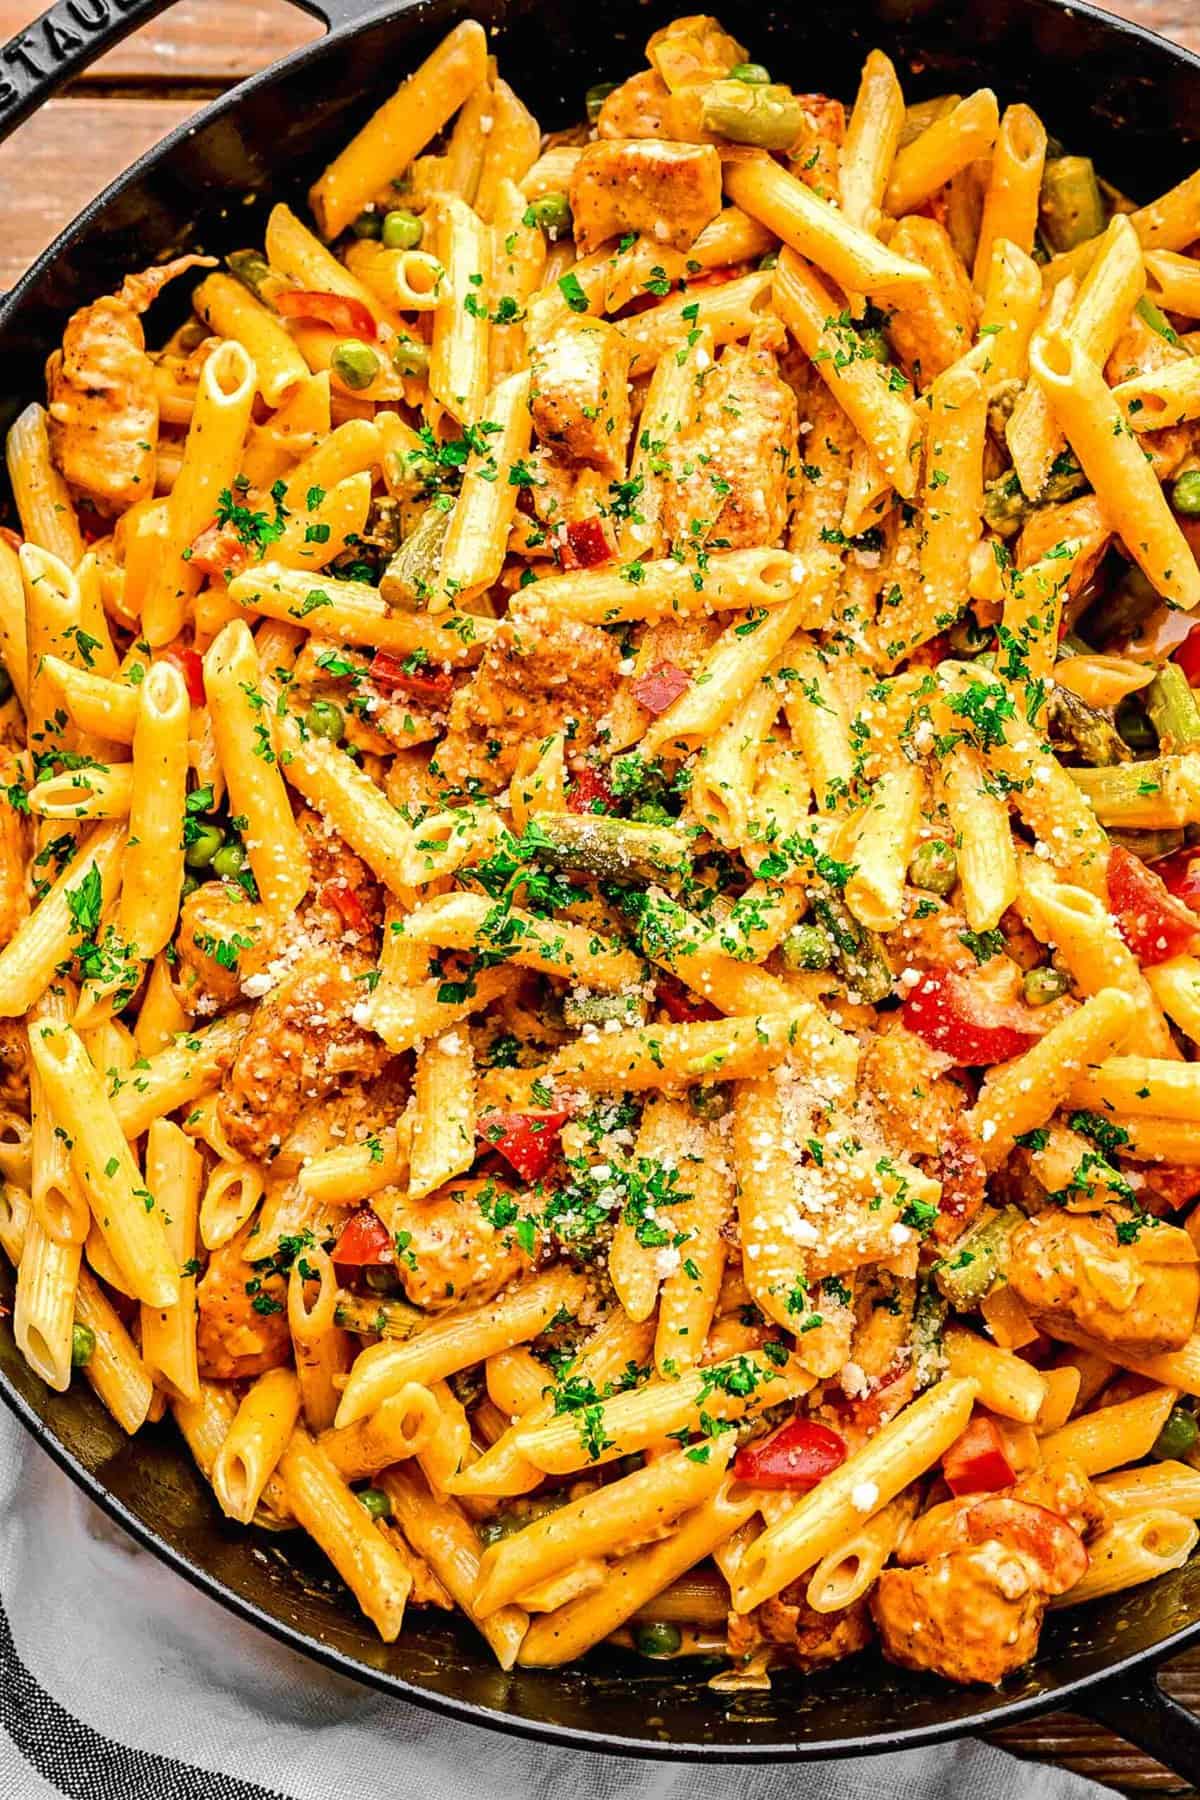 Spicy chicken chipotle pasta in a pan.